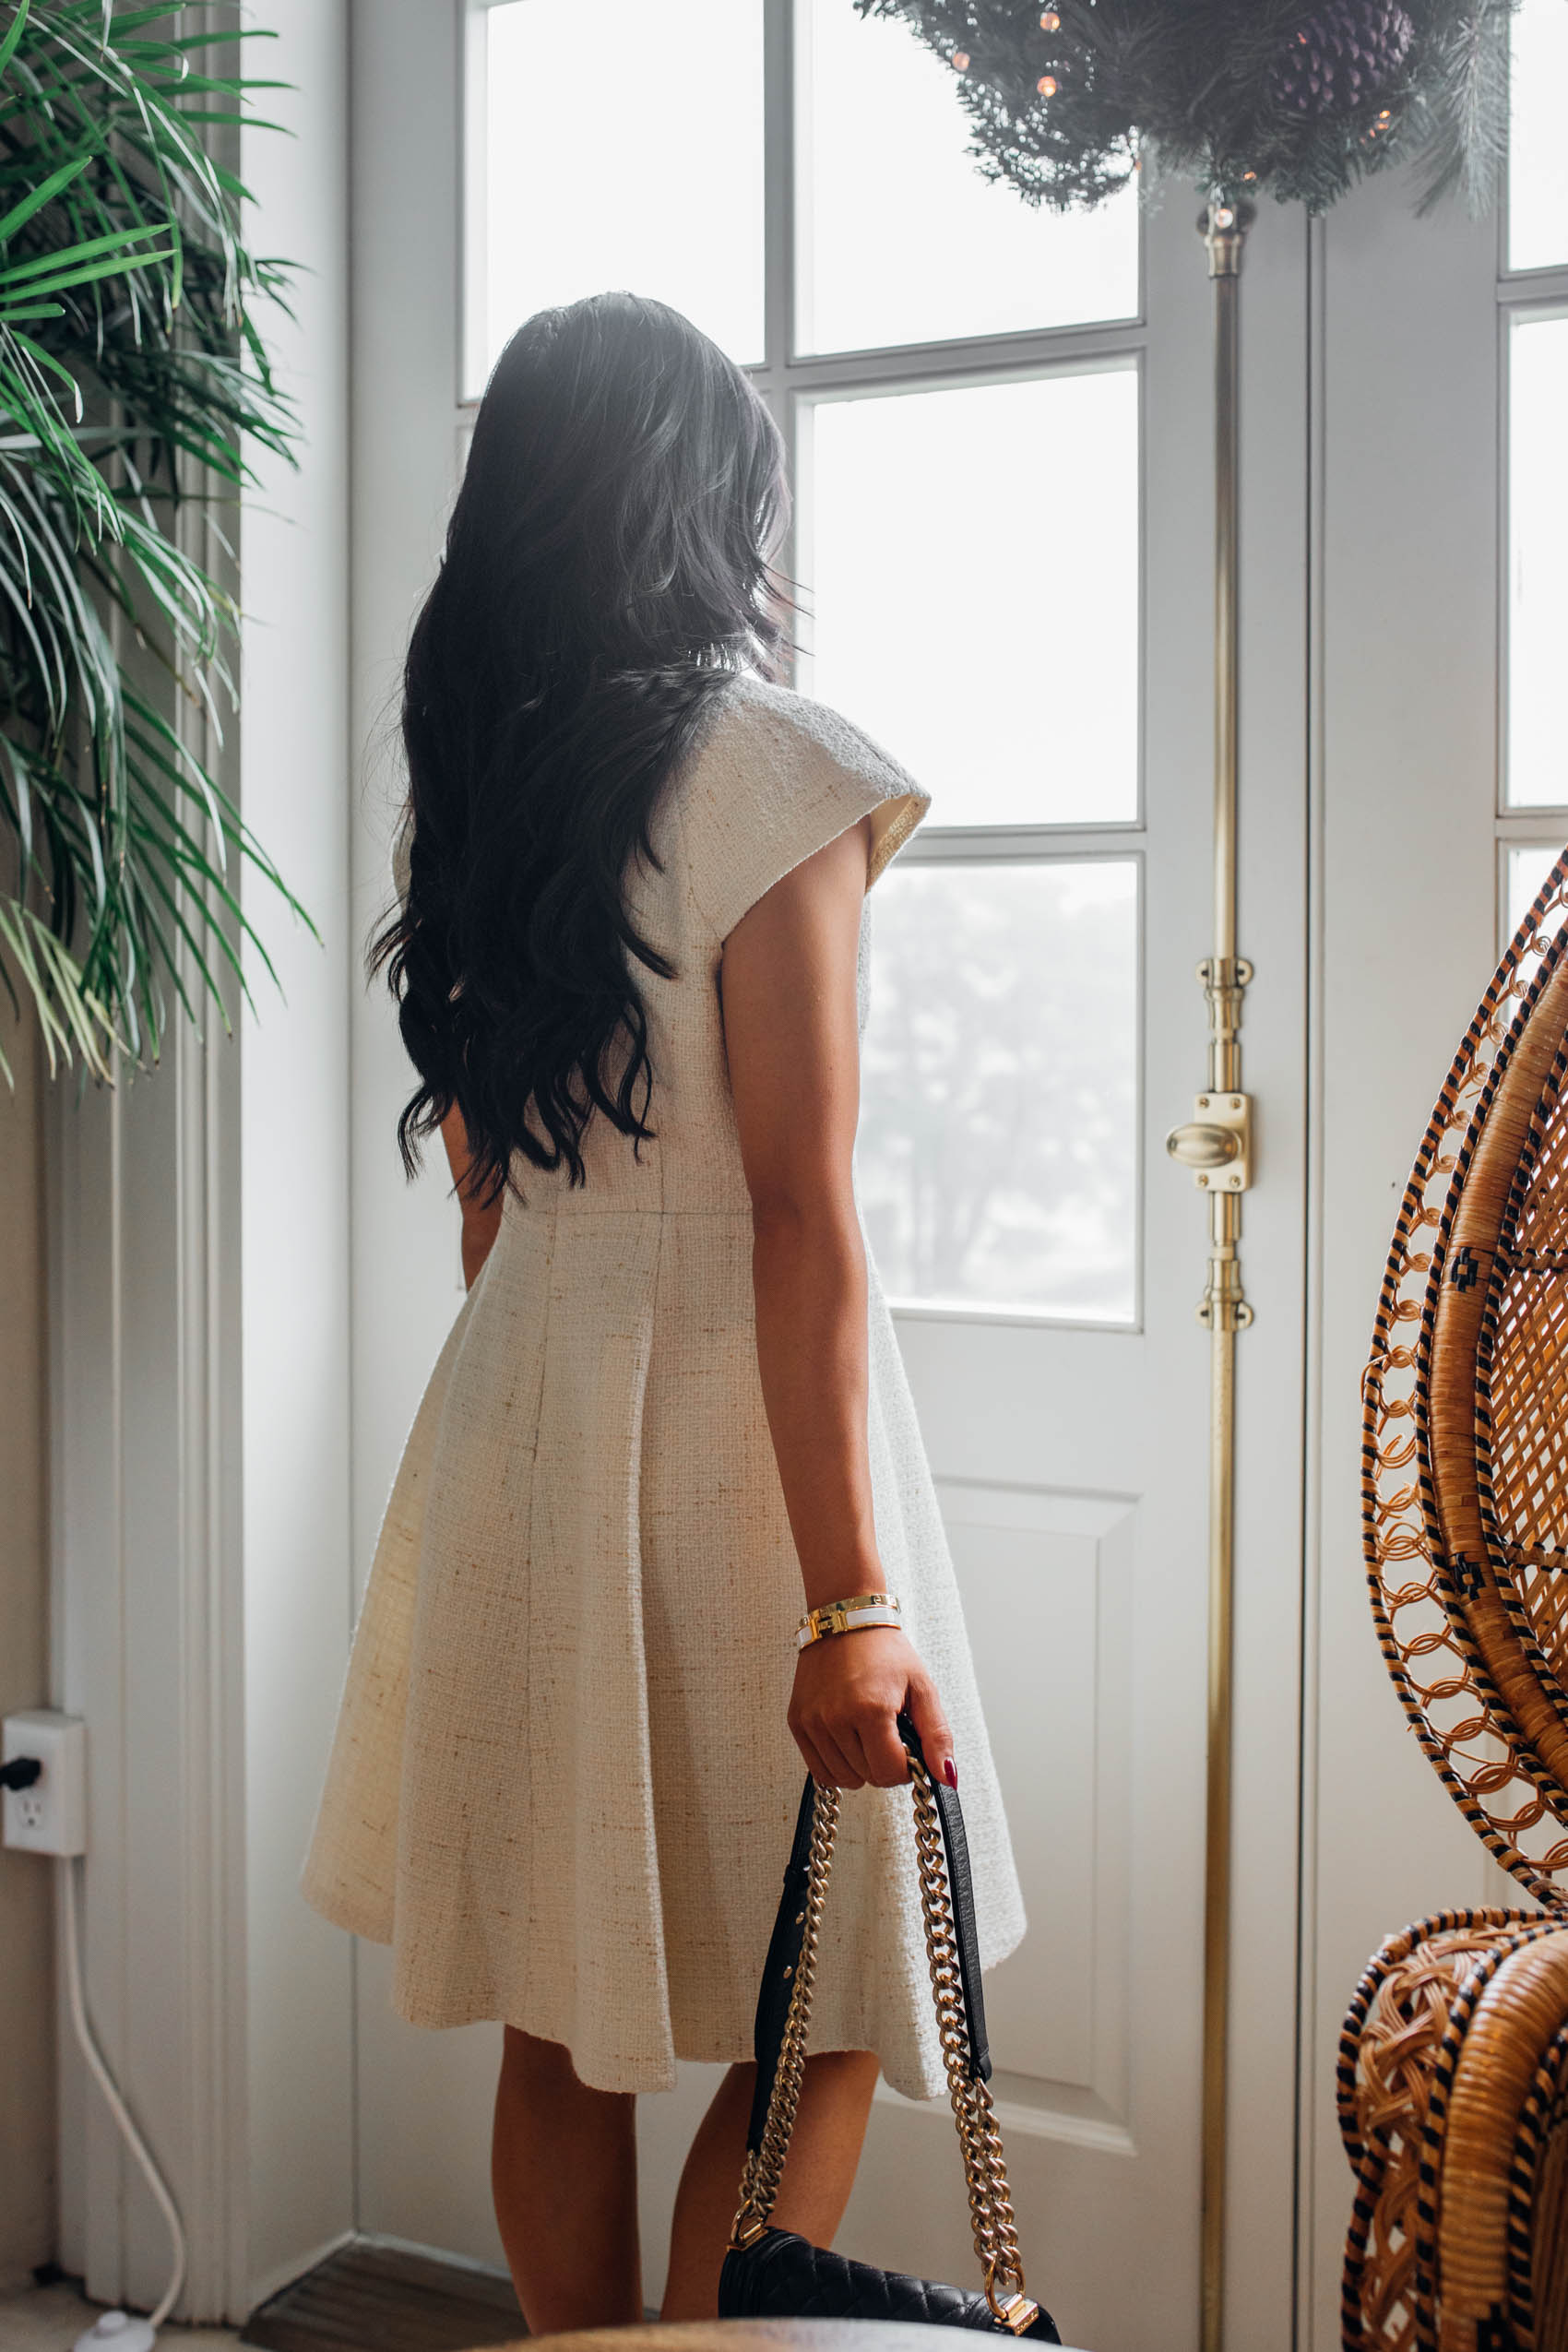 Blogger Hoang-Kim shares how to wear a white dress during winter